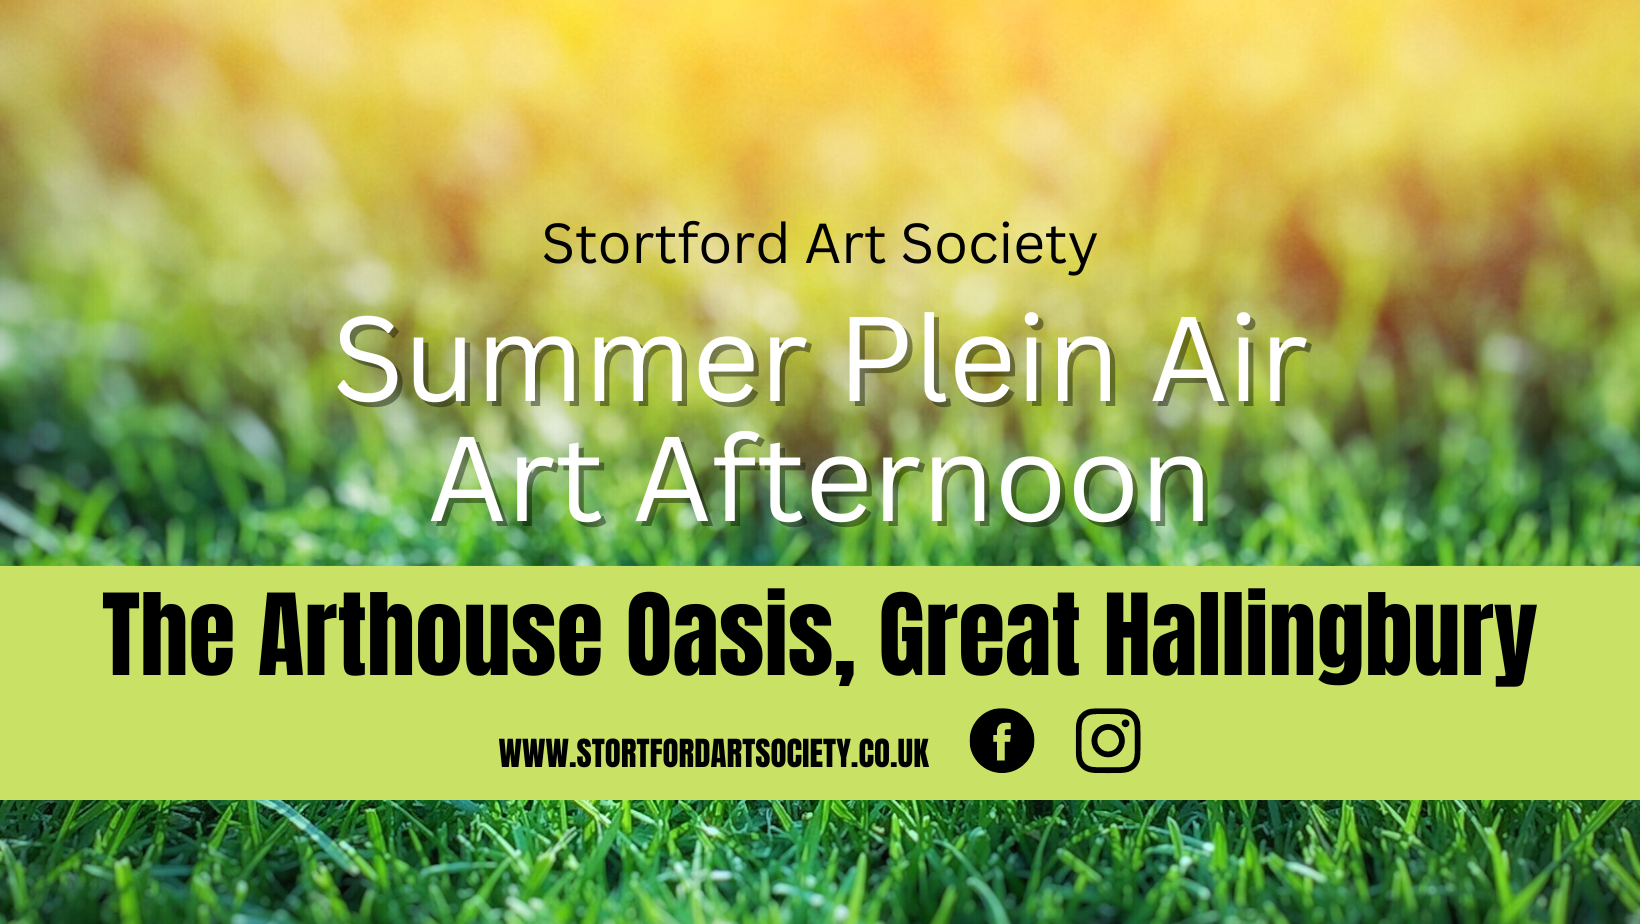 Plein Air Art Afternoon at The Arthouse Oasis, Hertfordshire